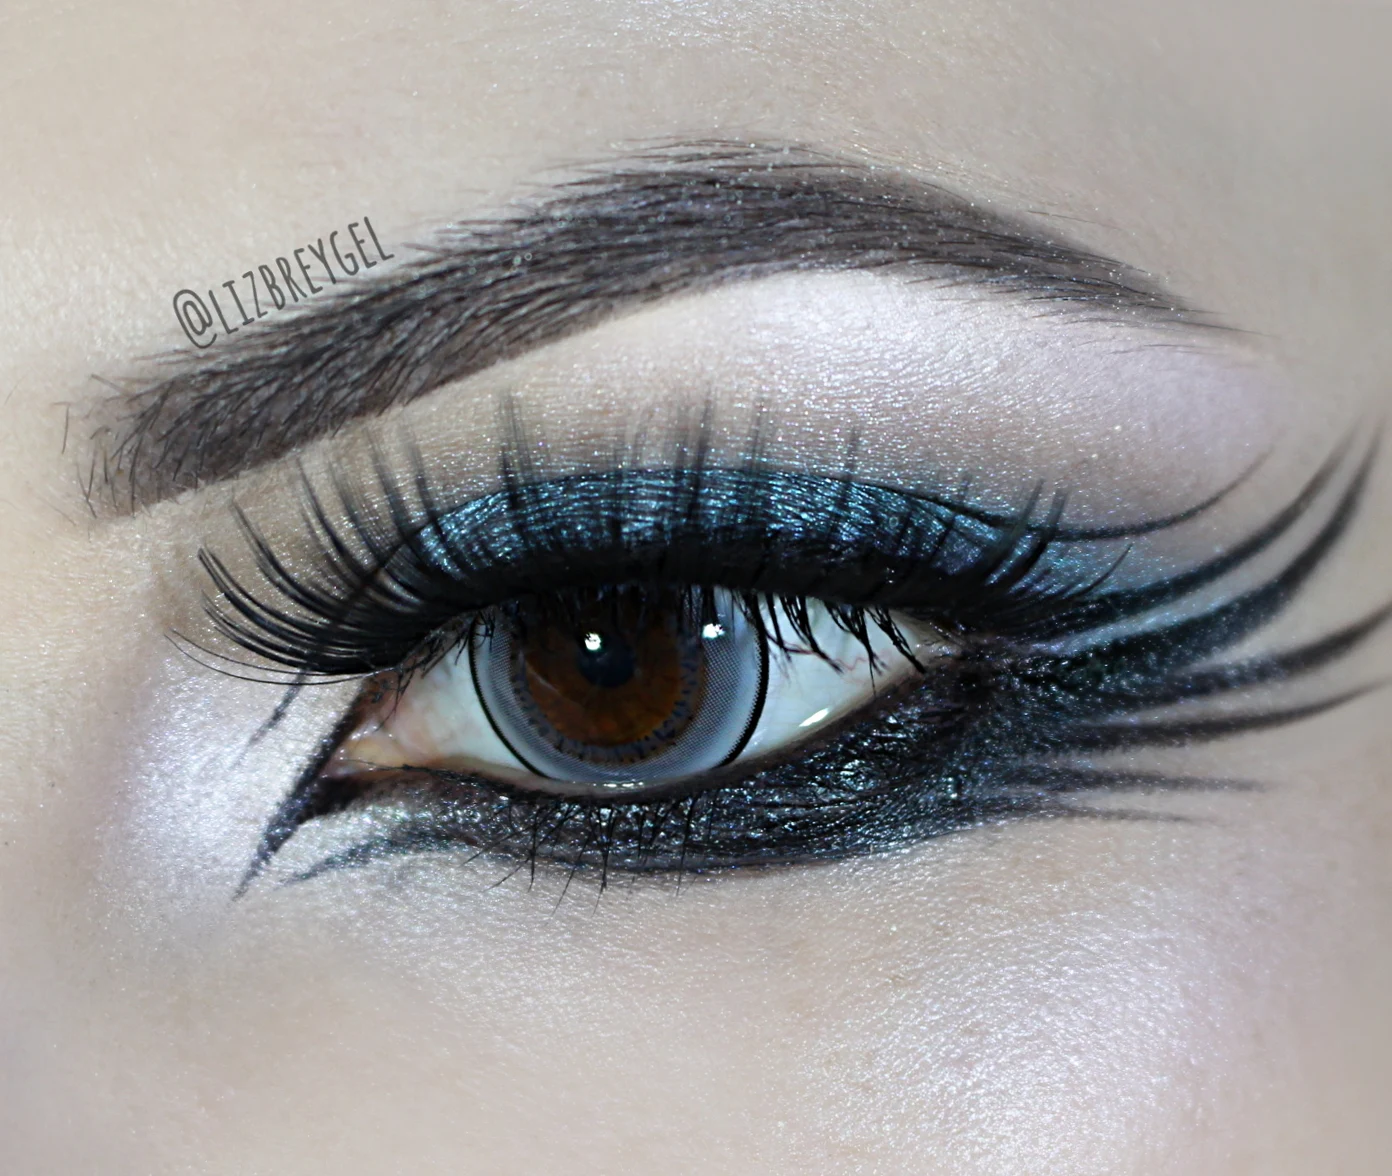 a close-up of an eye with an enlargind circle lens and a beautiful, gothic eye smokey look inspired by a raven wing